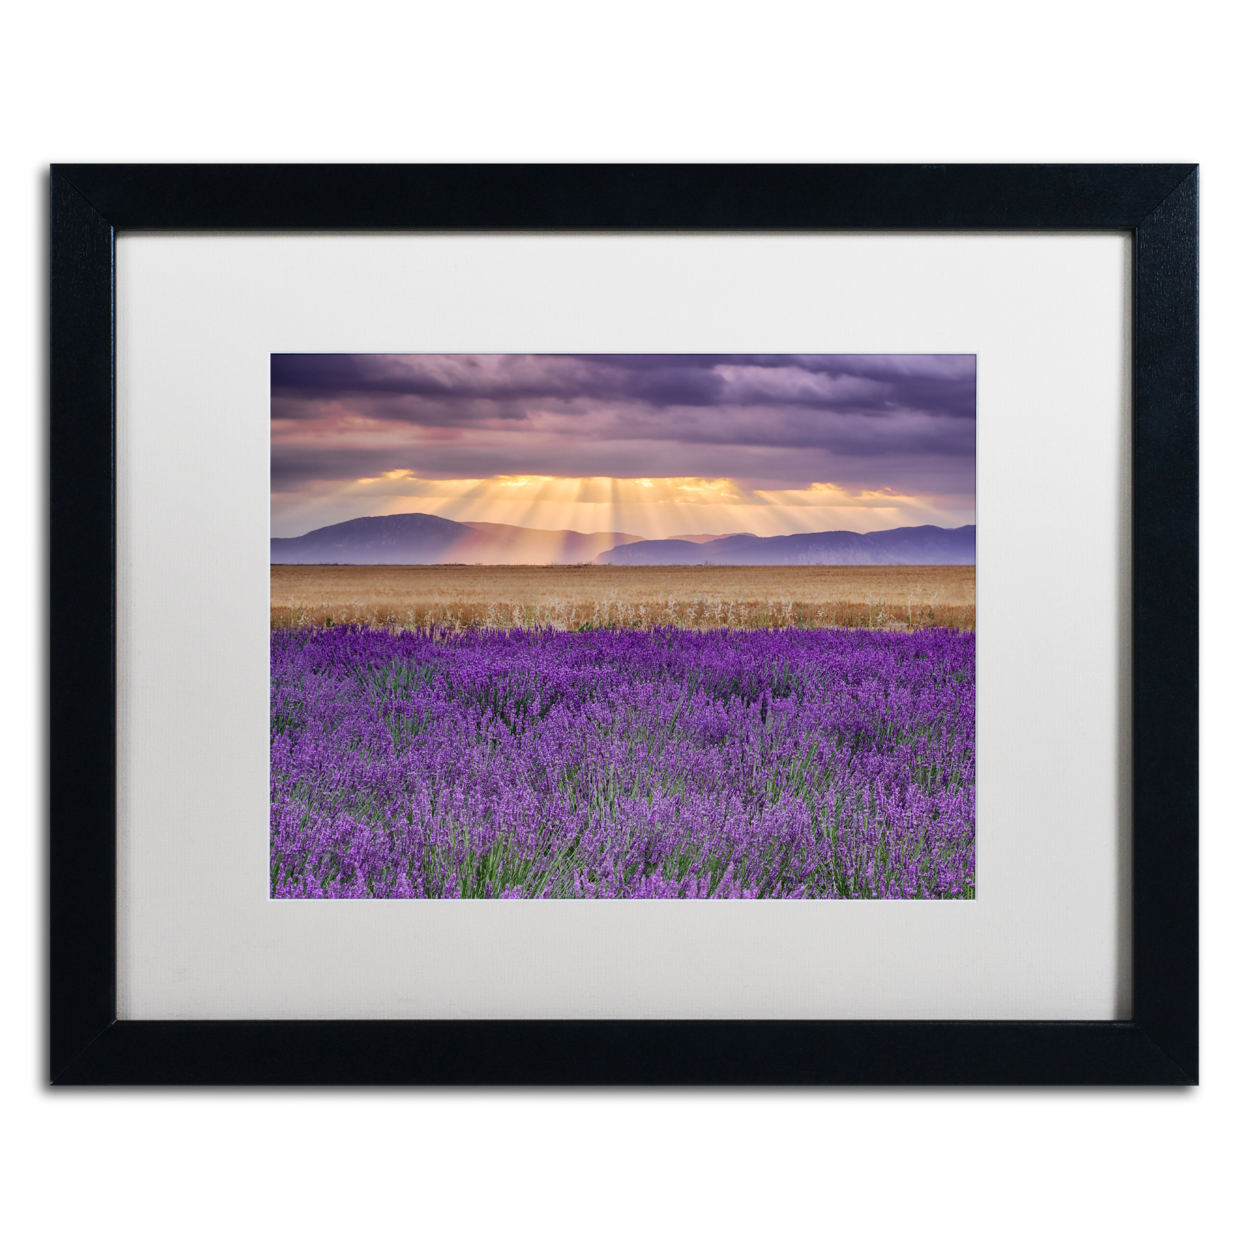 Michael Blanchette Photography 'Lavender Sunbeams' Black Wooden Framed Art 18 X 22 Inches